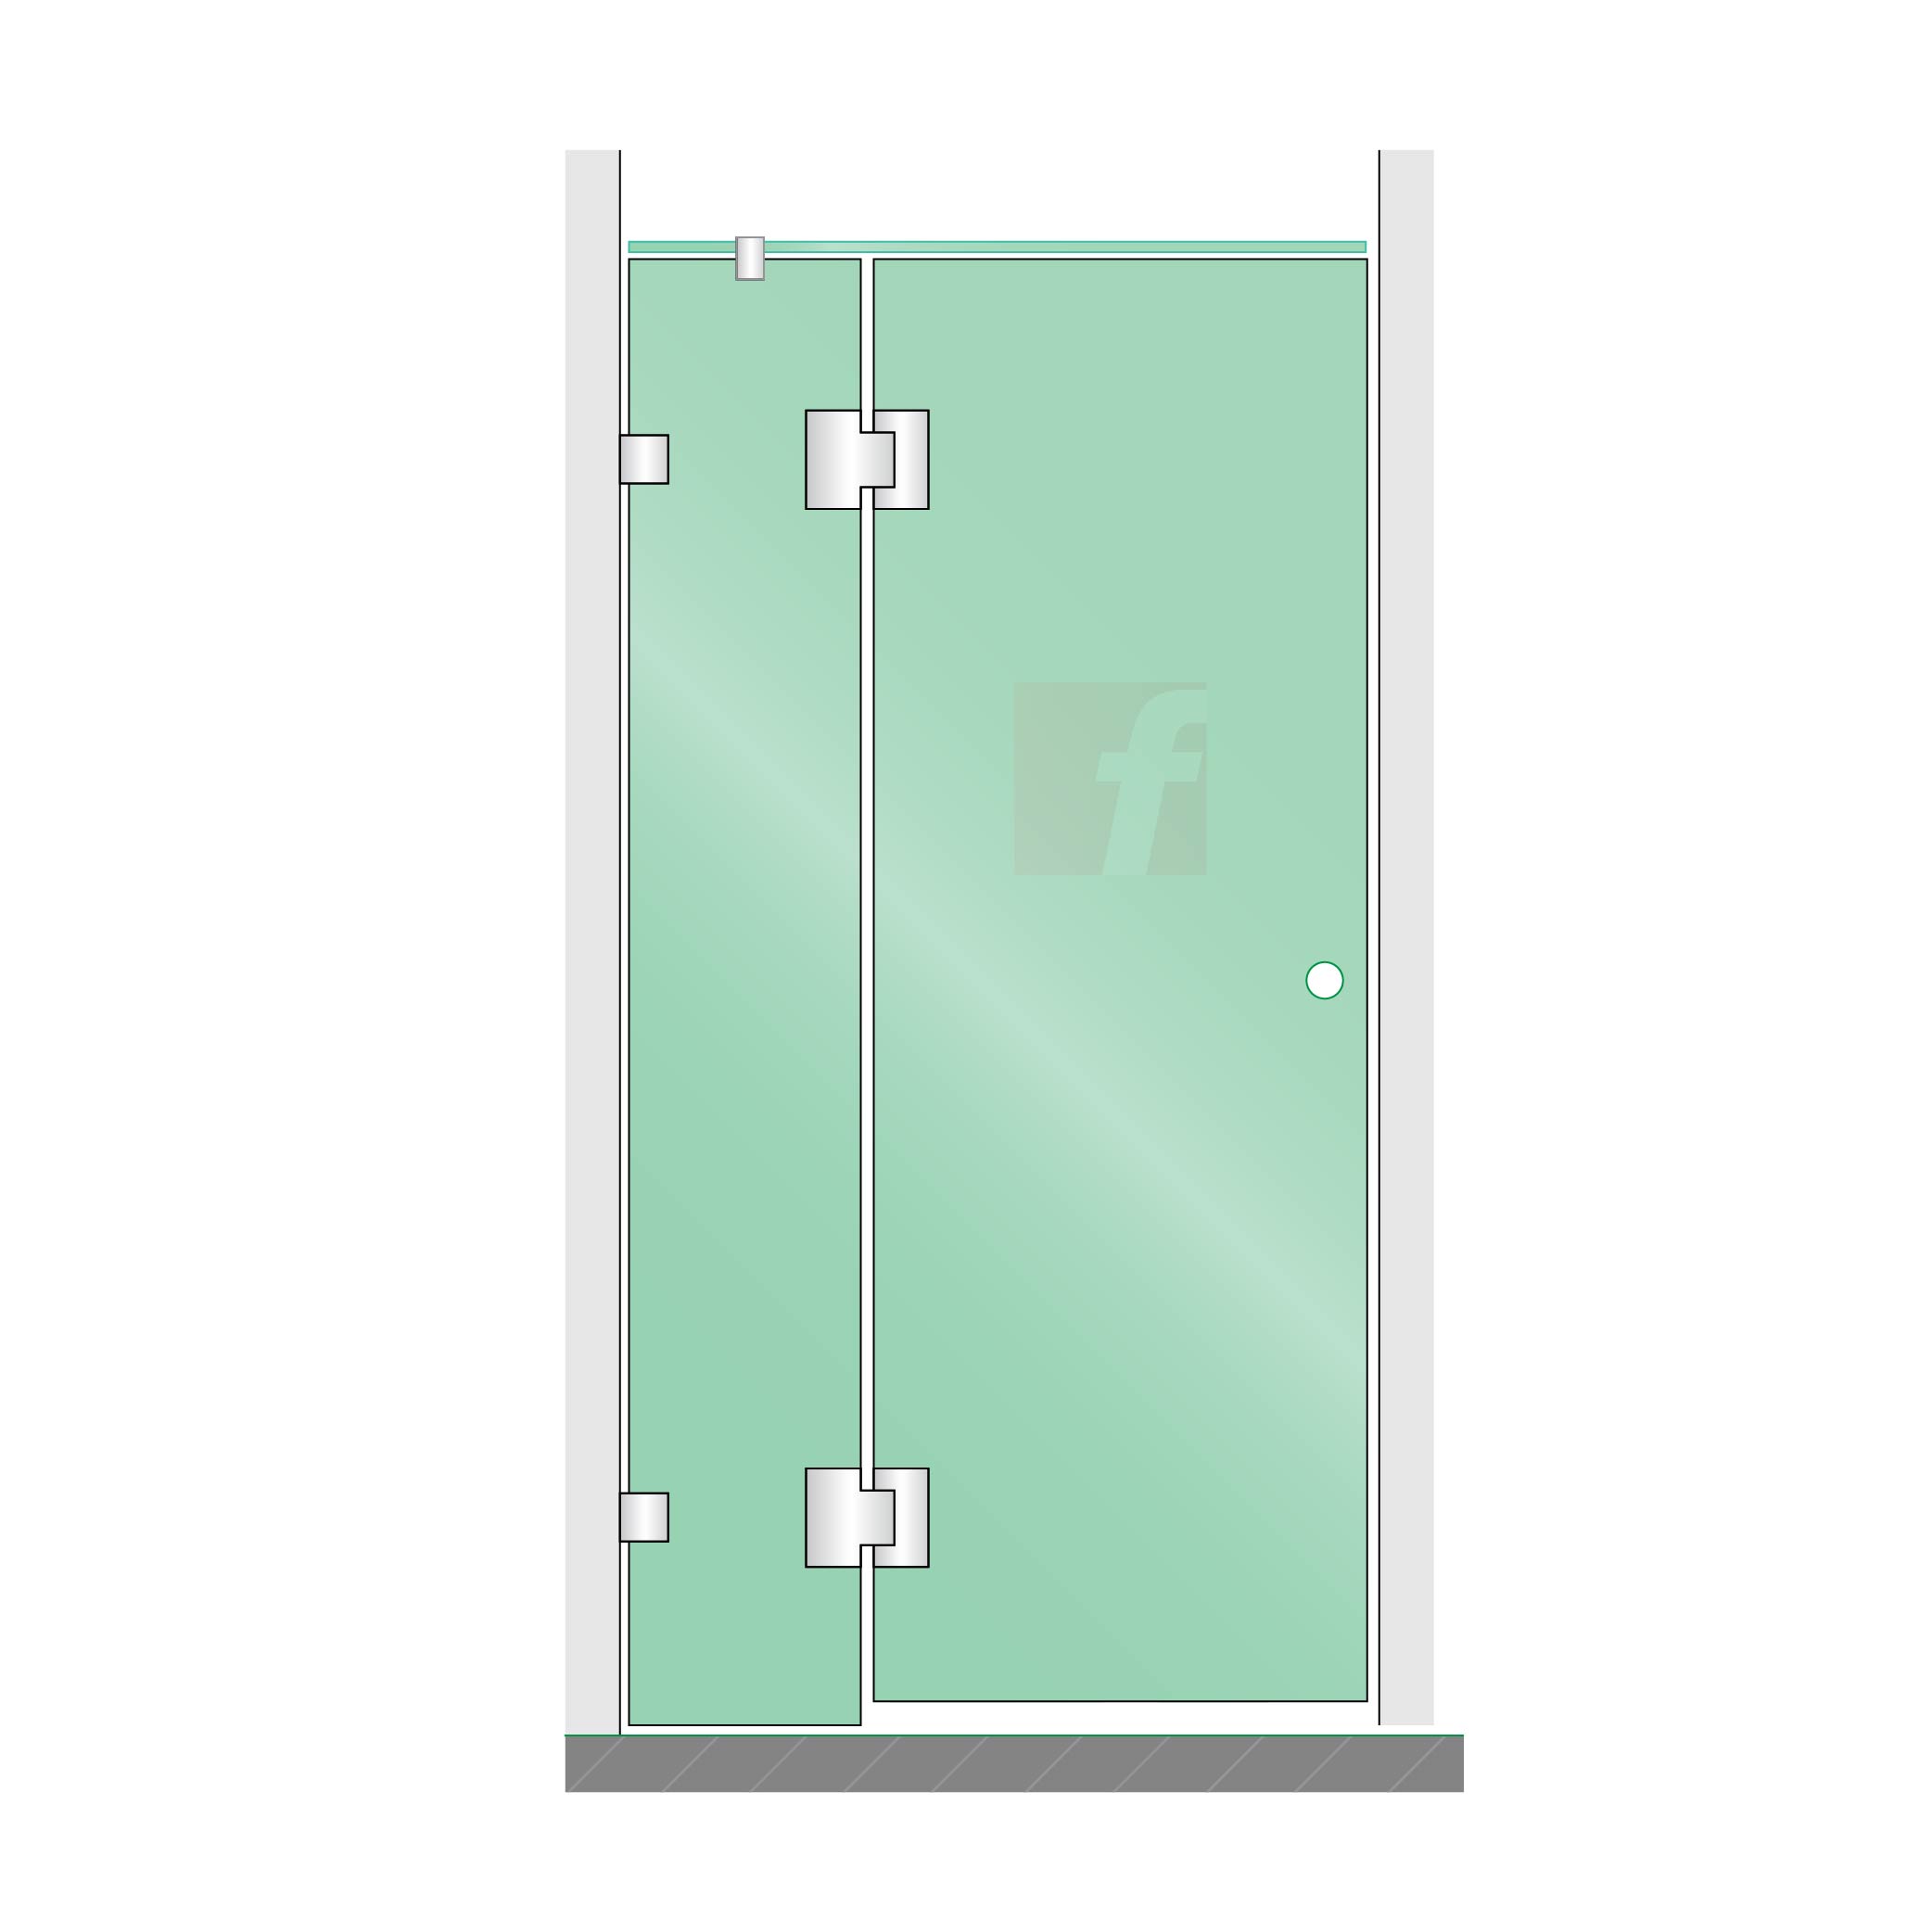 2 PANEL A (IN-LINE) WITH CHROME PLATED HARDWARE